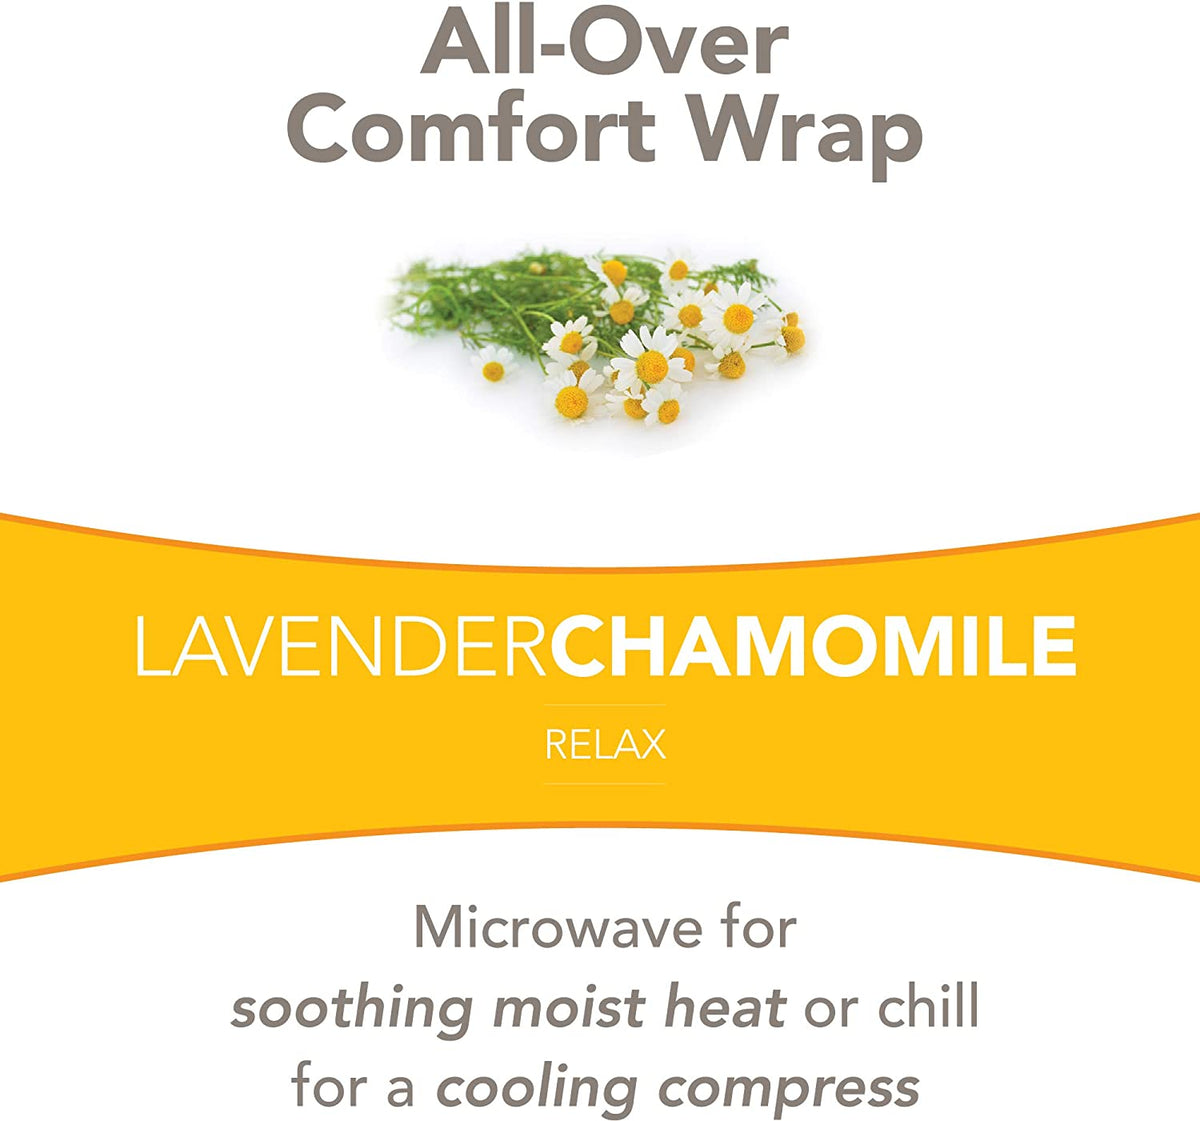 Text All-Over Comfort Wrap. Lavender Chamomile. Relax. Microwave for soothing moist heat